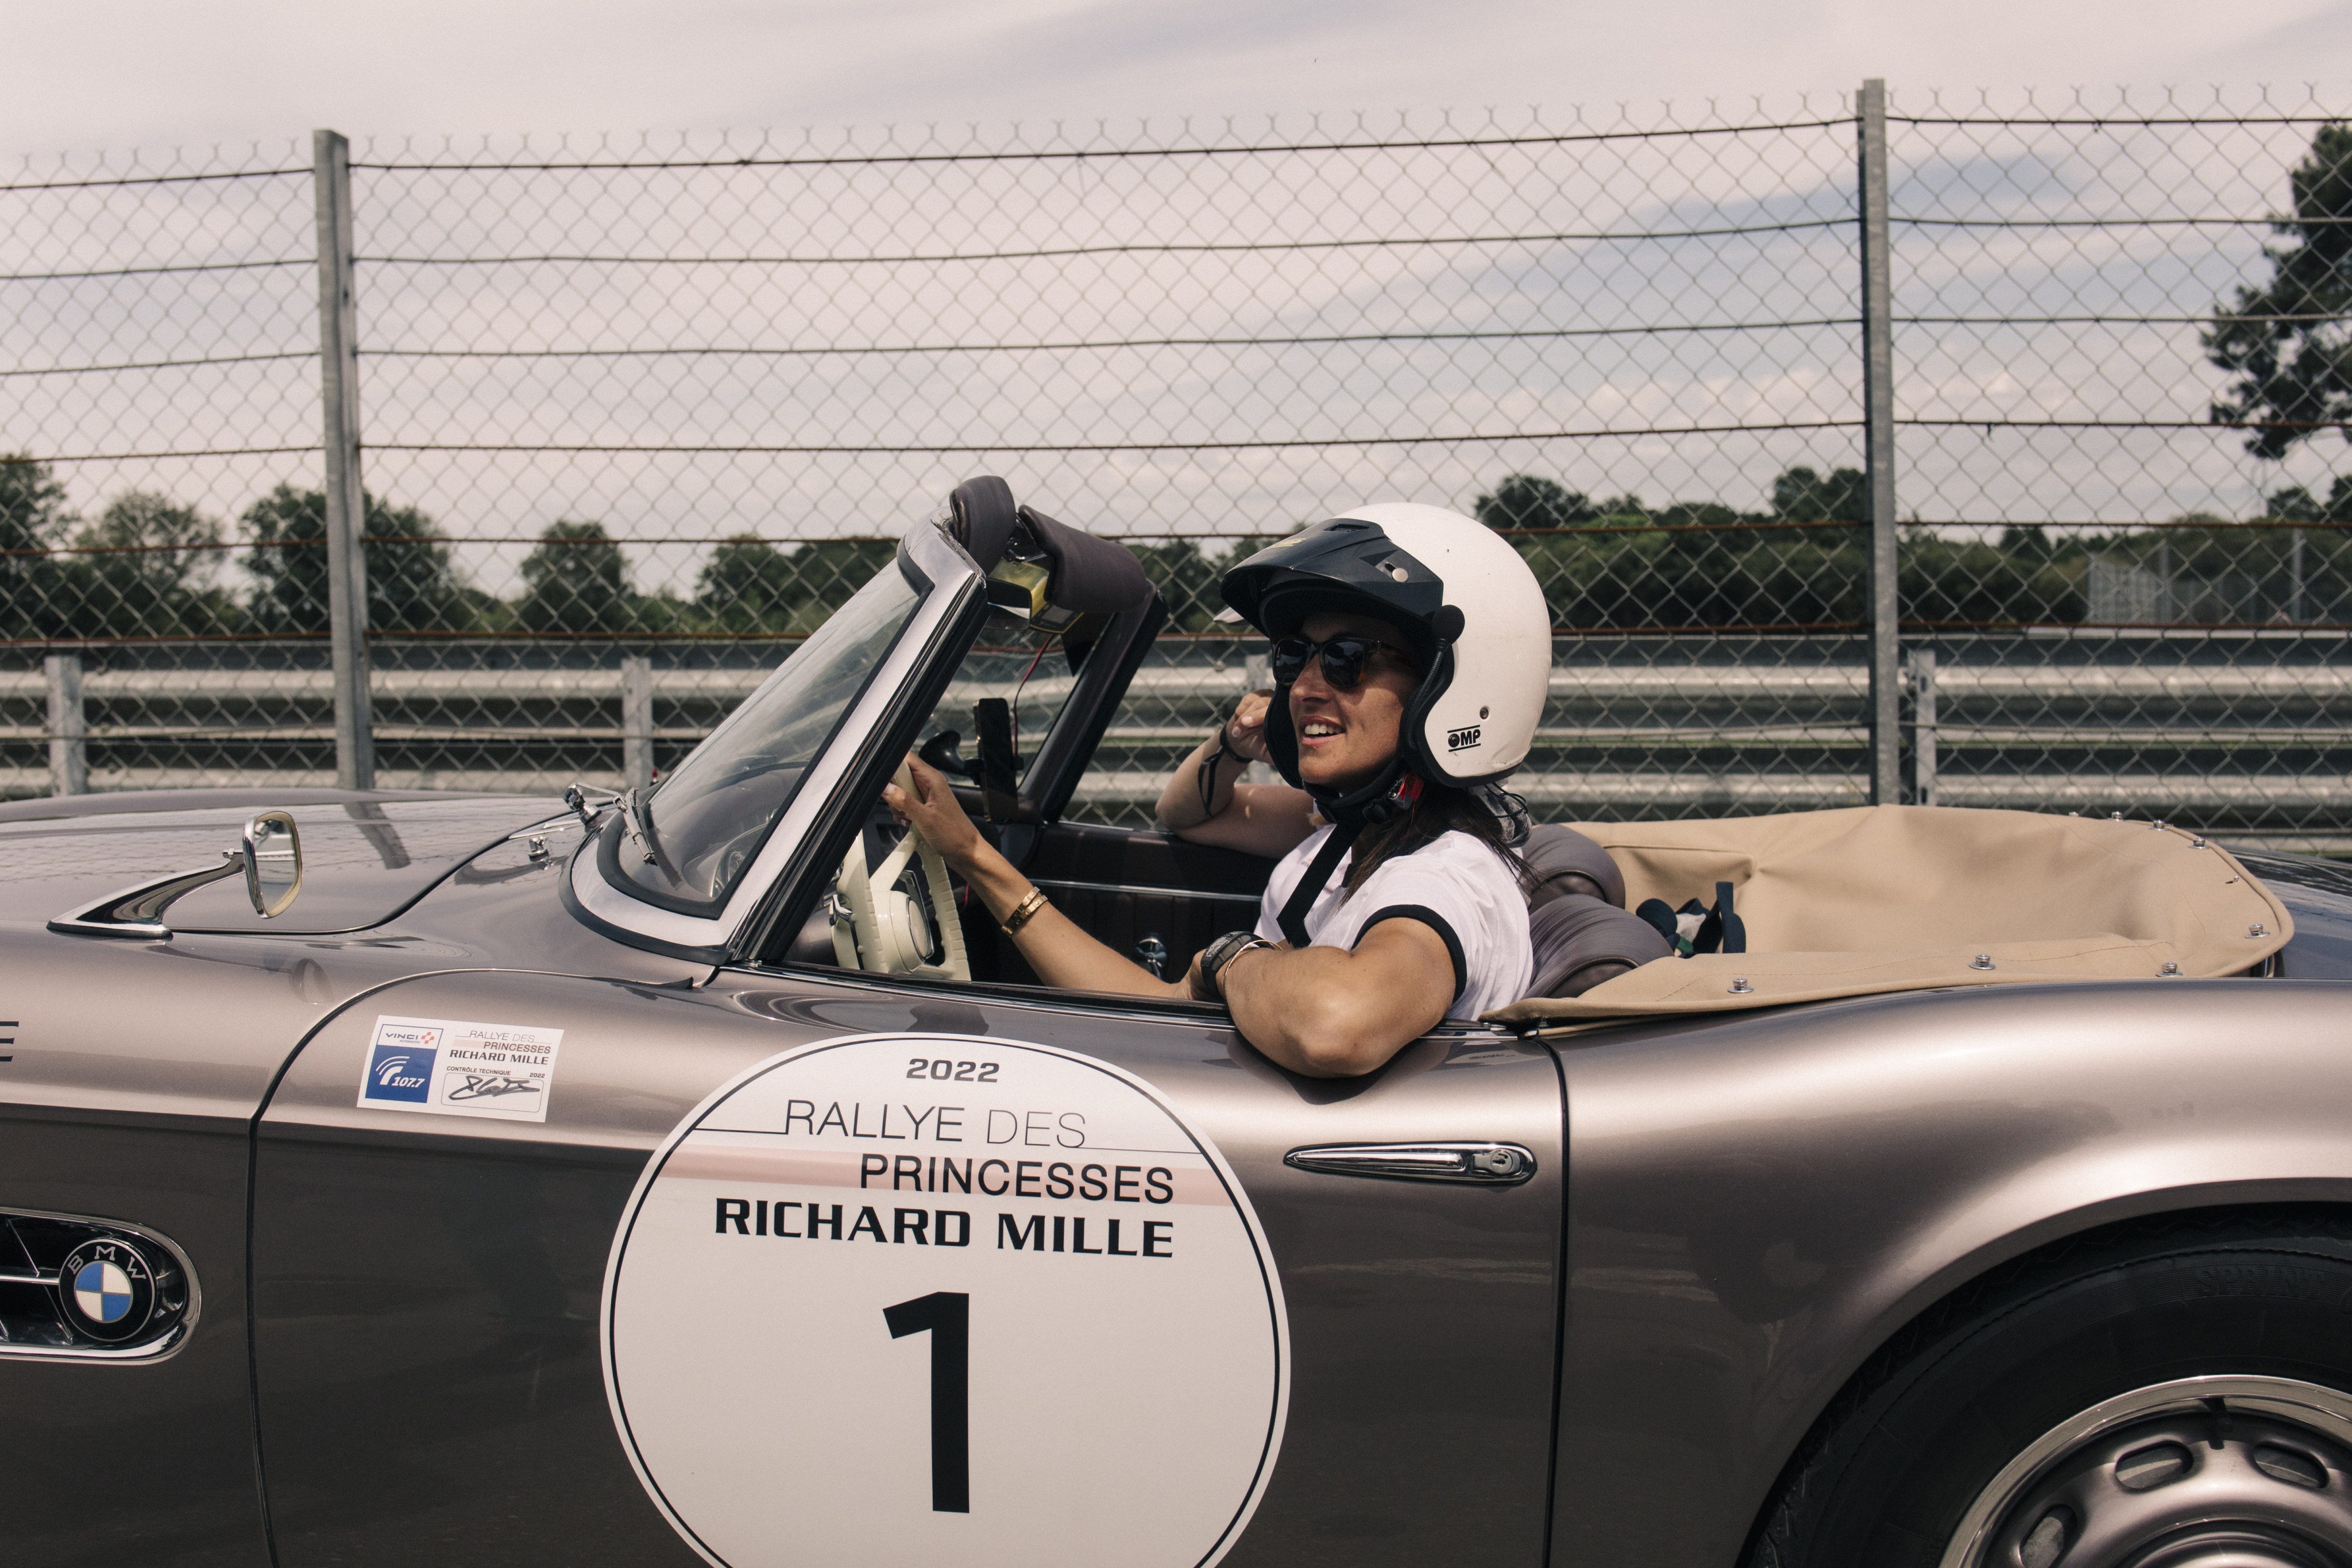 Classic cars and an all-female lineup are a feature of the Rallye des Princesses. Photos: Handout